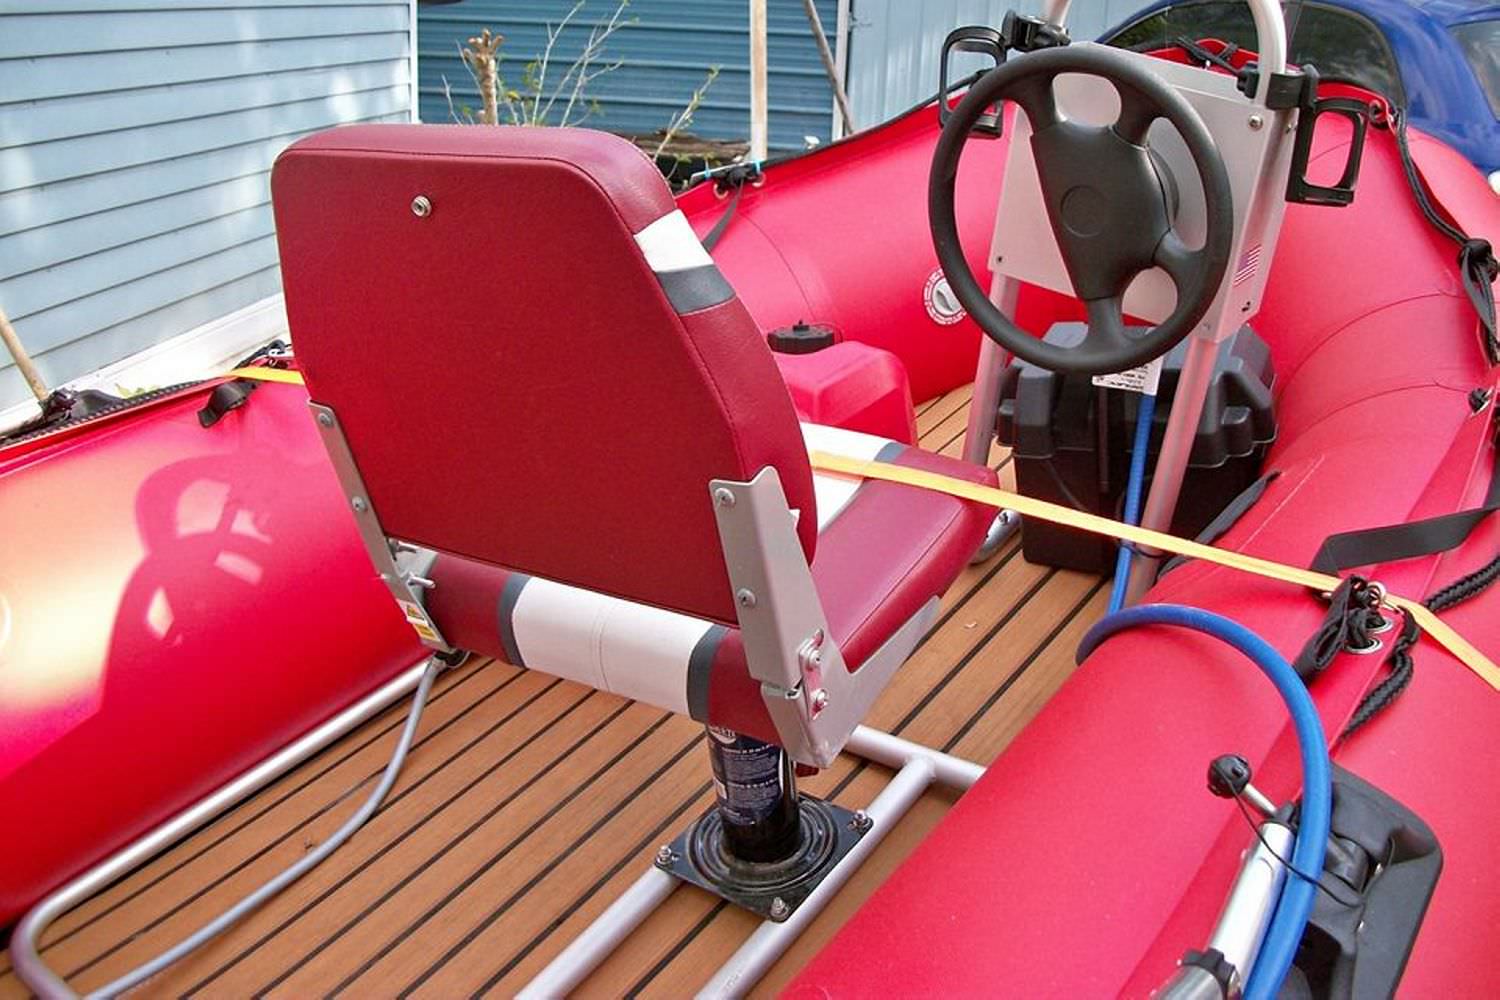 Boat Seating